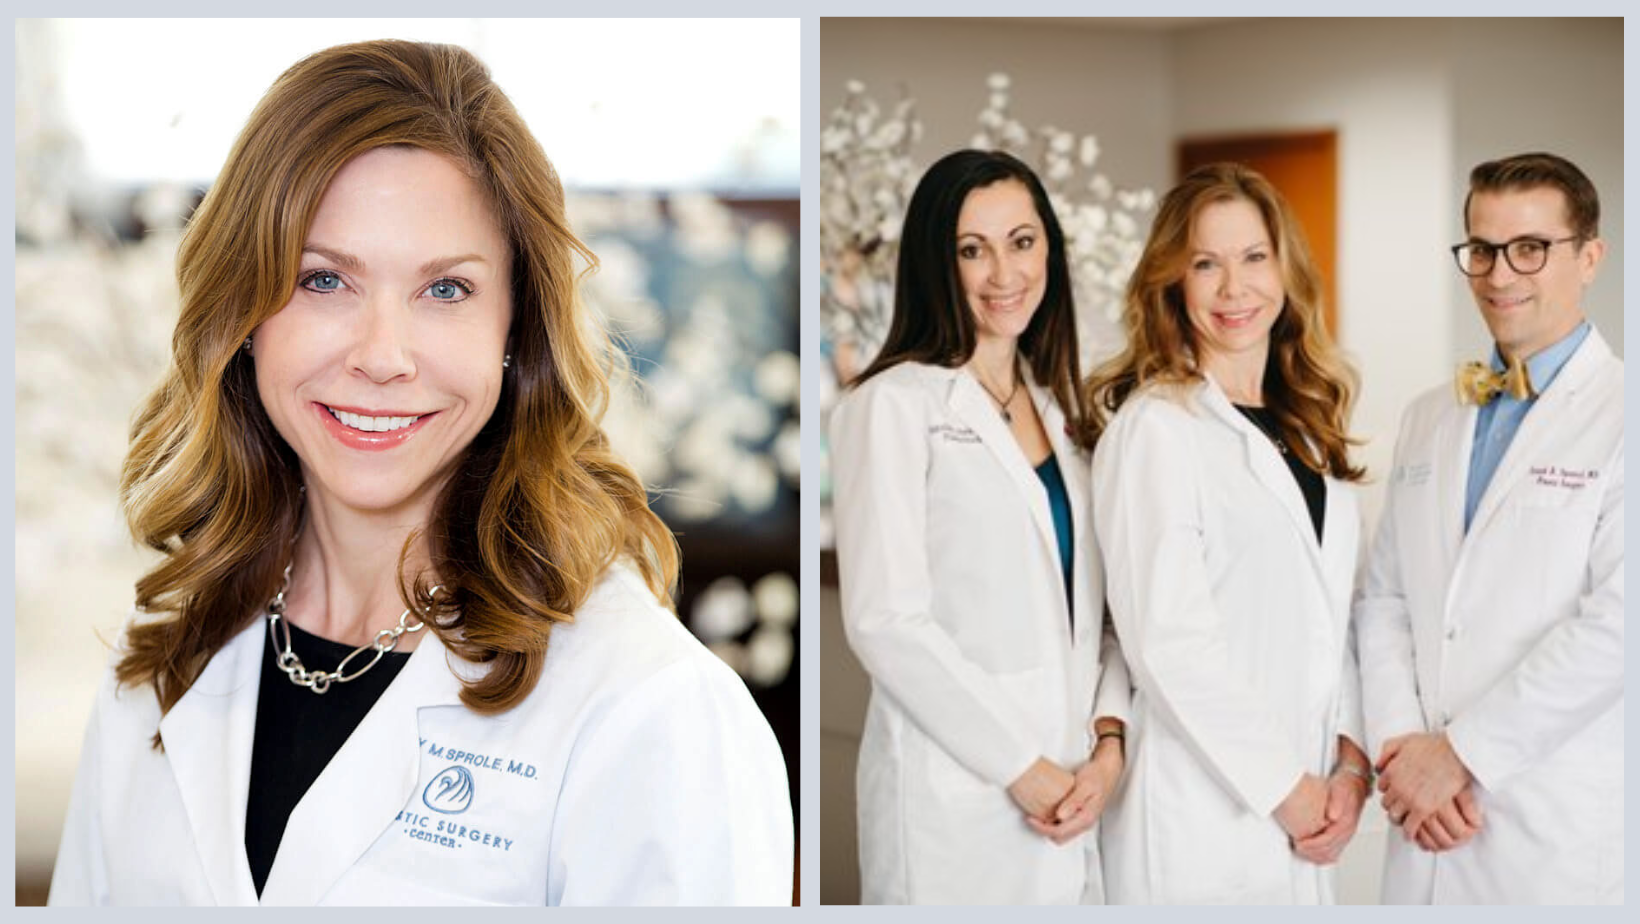 Was Dr Amy Sprole Sued For Mishandling Plastic Surgery?